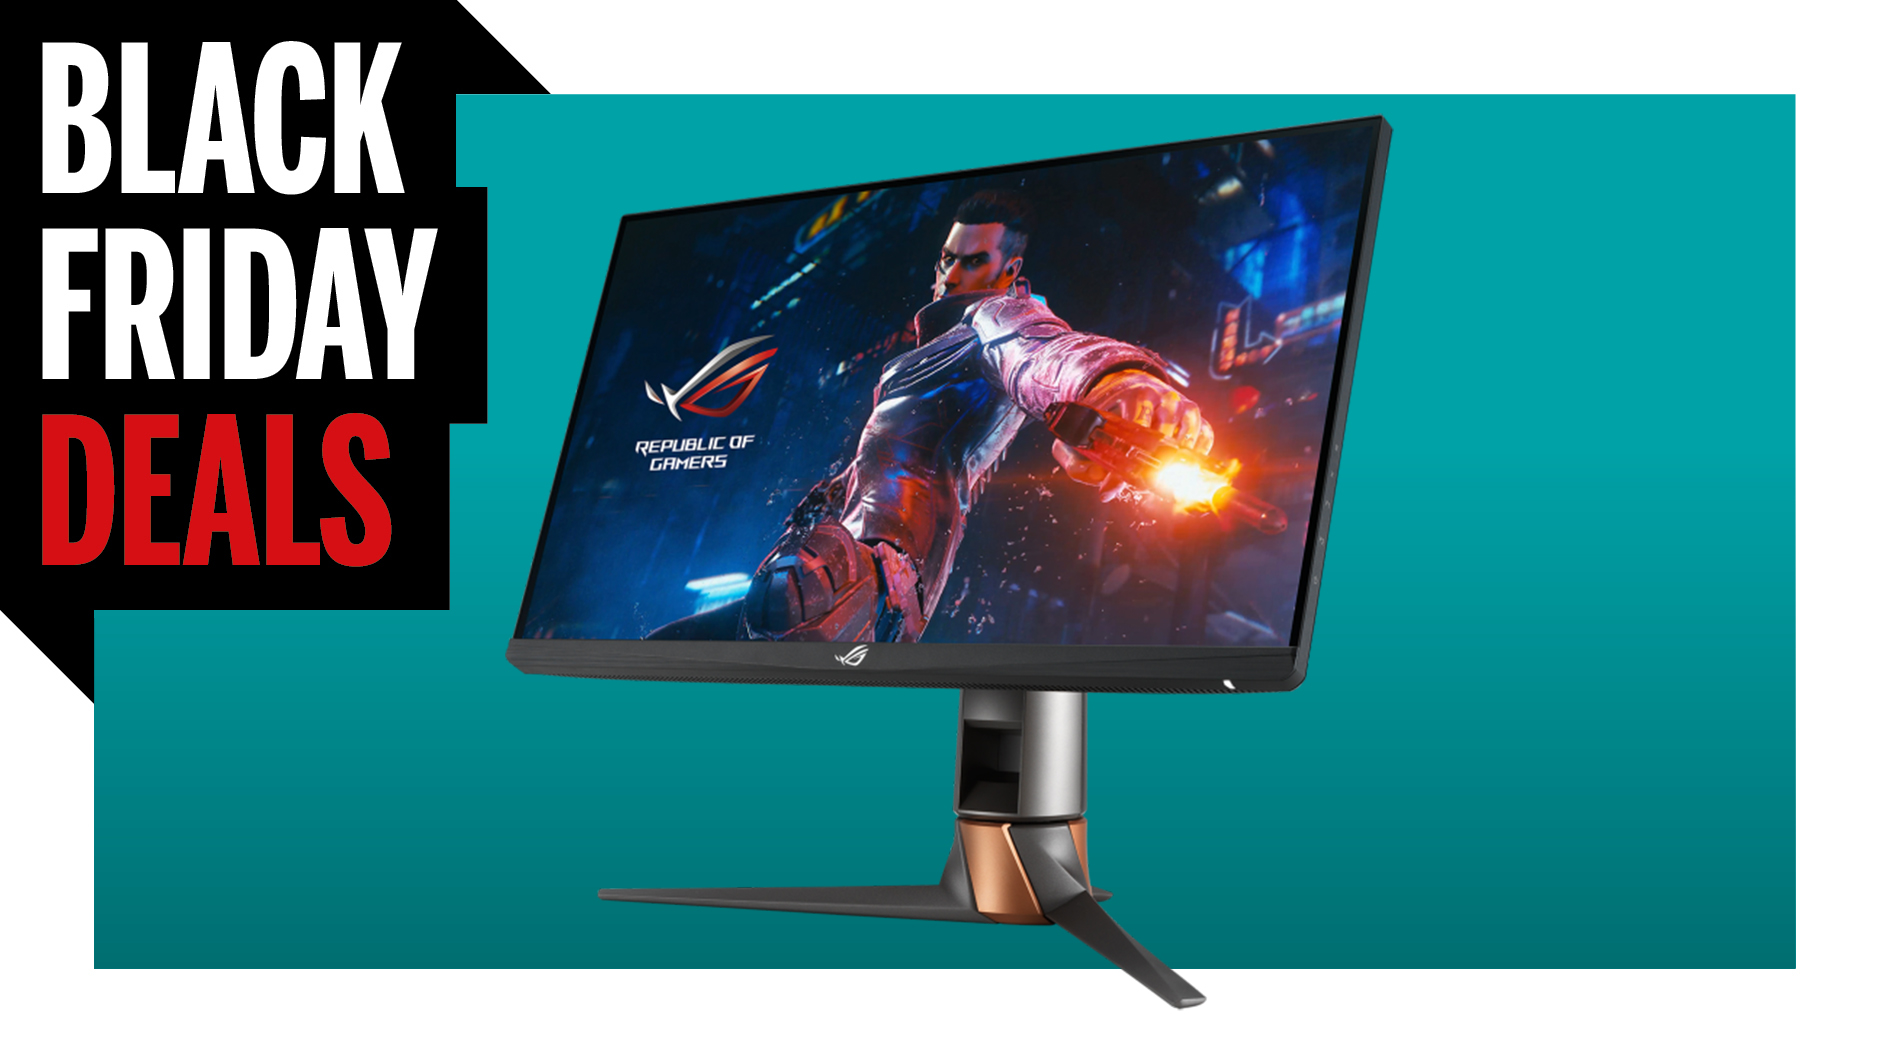  This Asus 360Hz monitor is the lowest price it's been thanks to this Black Friday gaming monitor deal 